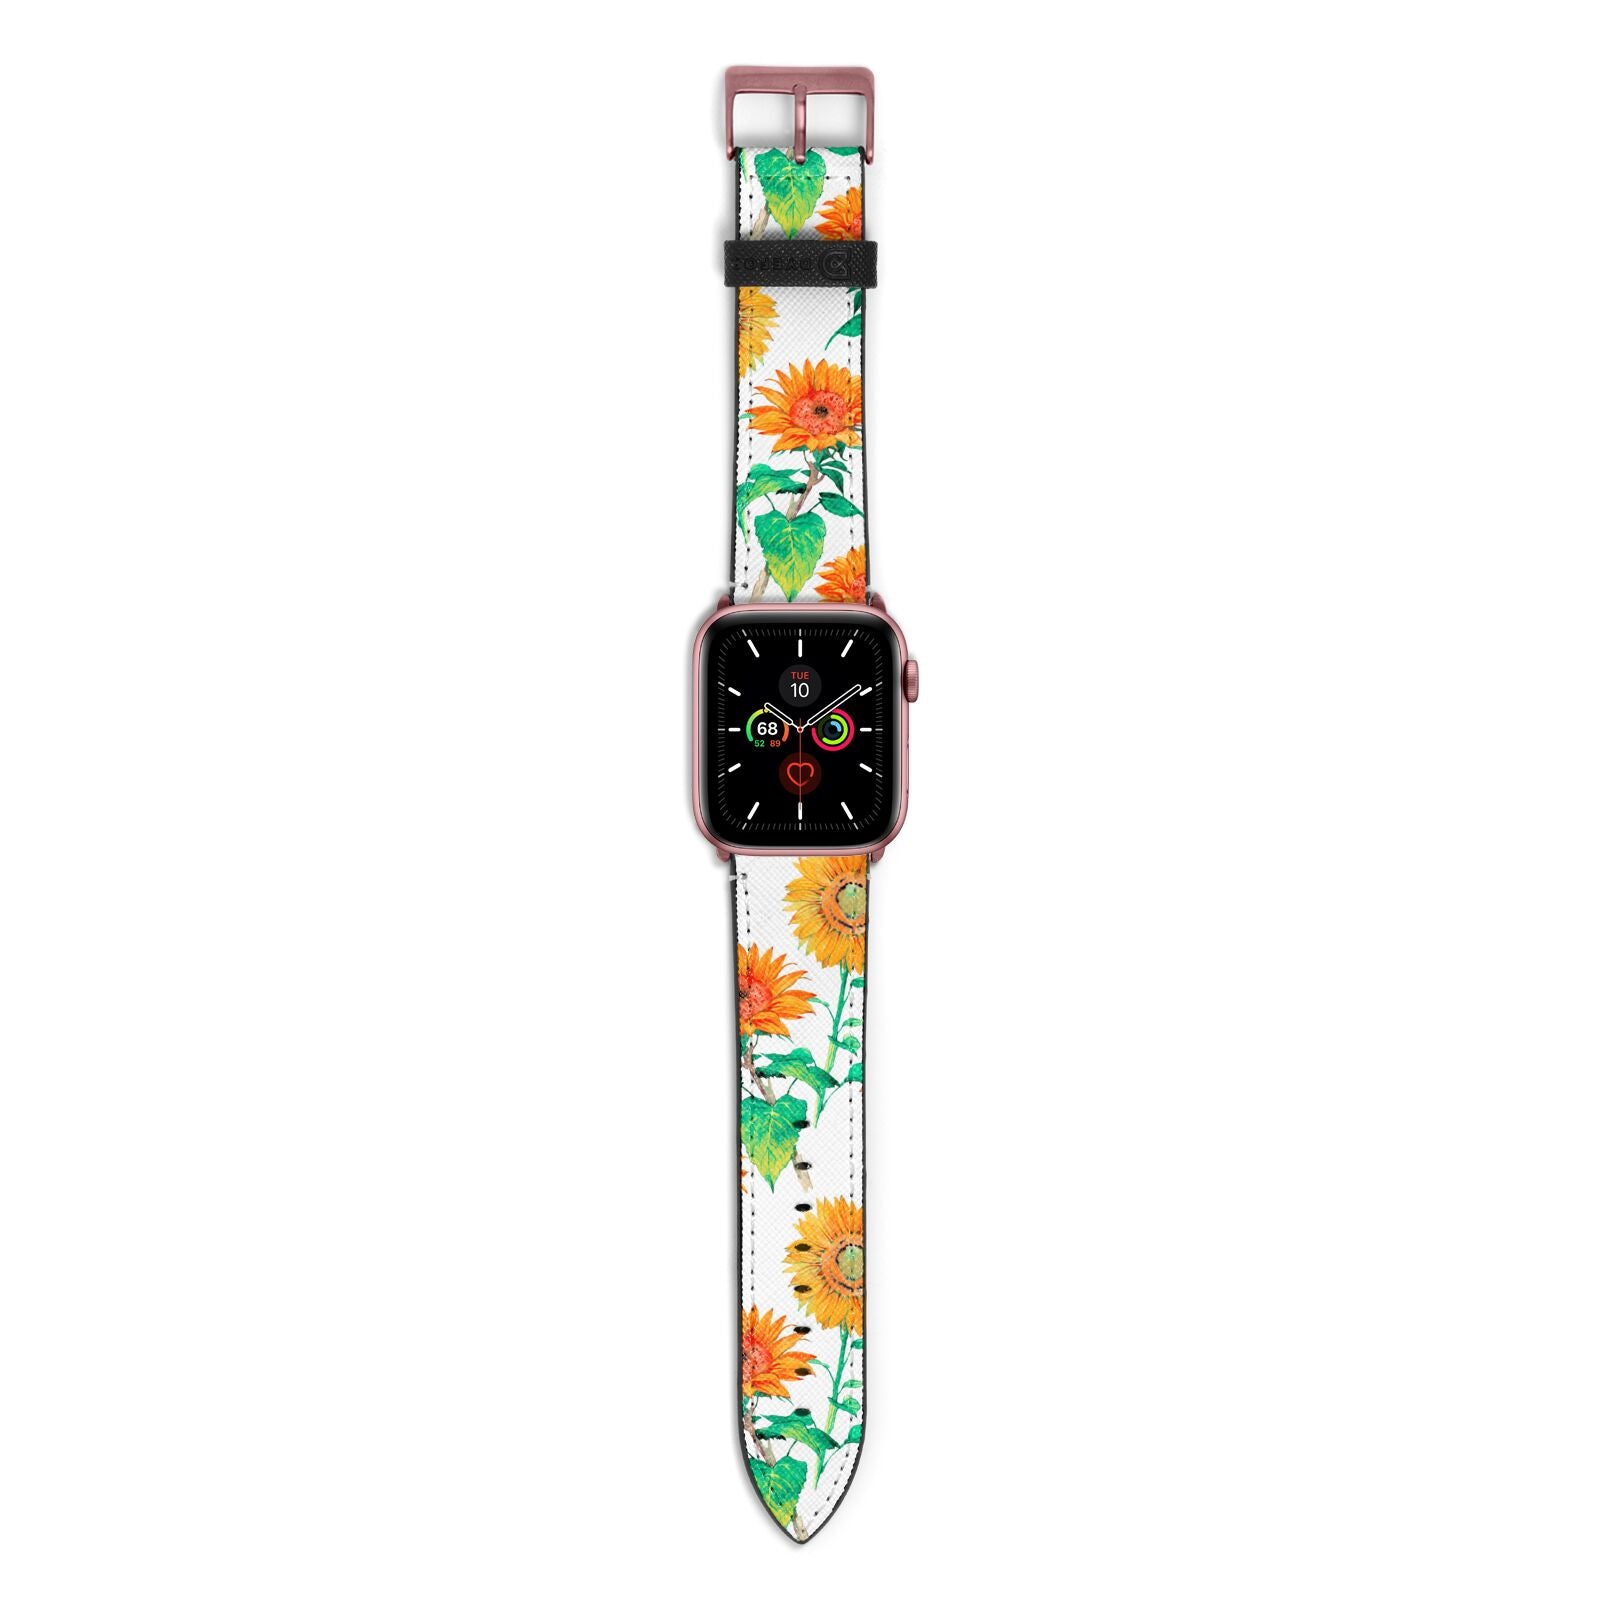 Sunflower Pattern Apple Watch Strap with Rose Gold Hardware